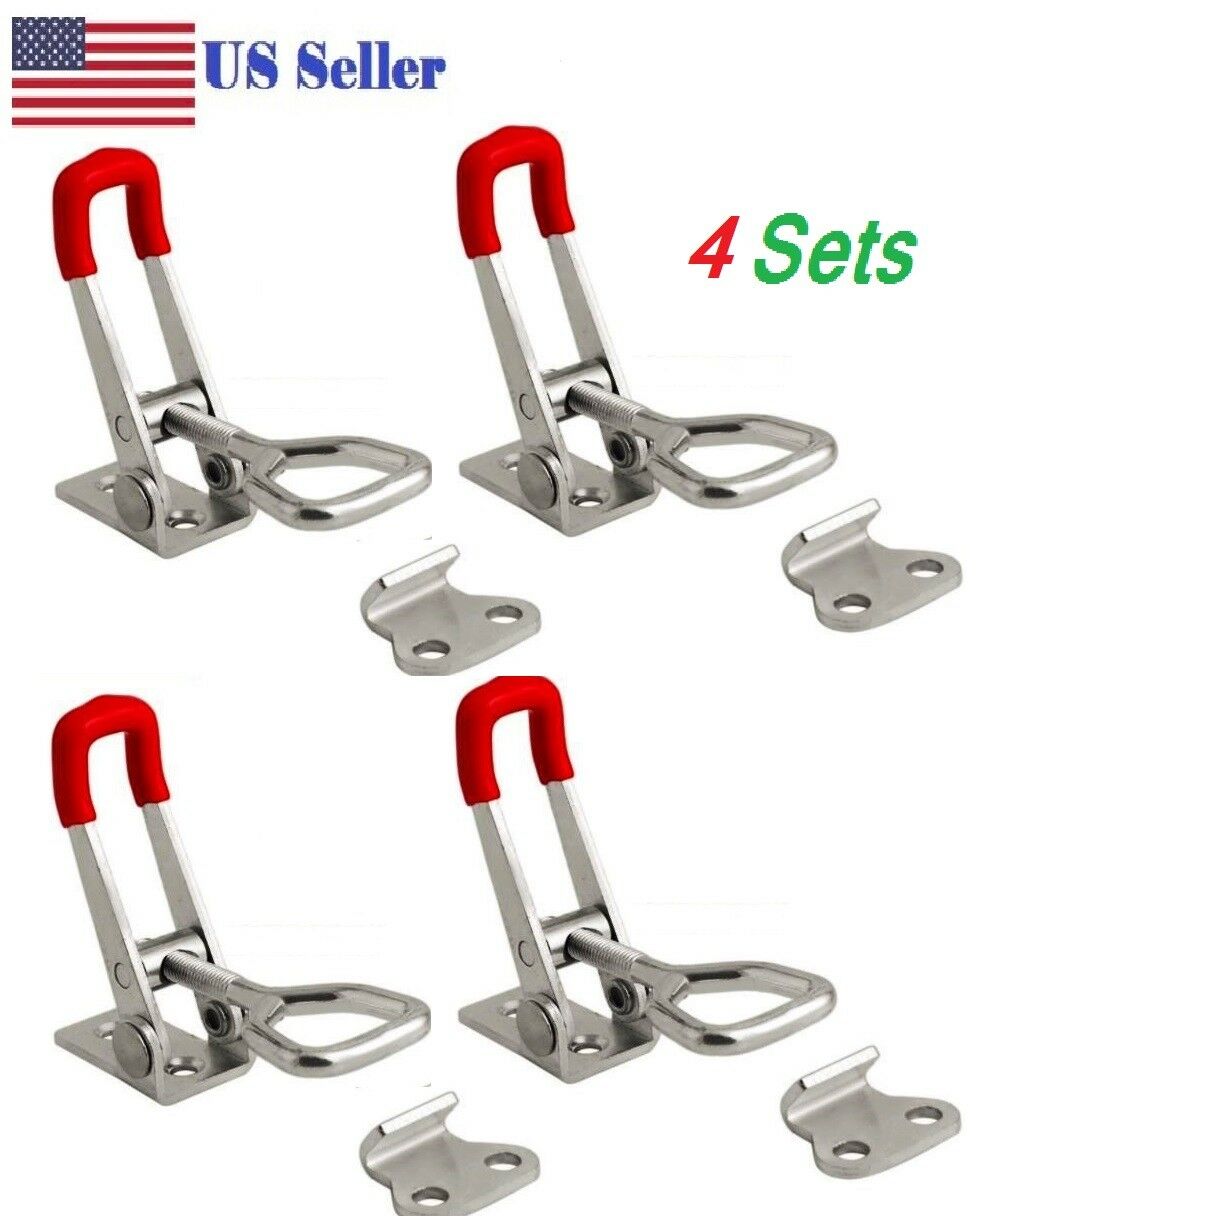 4pcs  Steel Toggle Latch Catches Adjustable Lock Clamp For Boxes Case